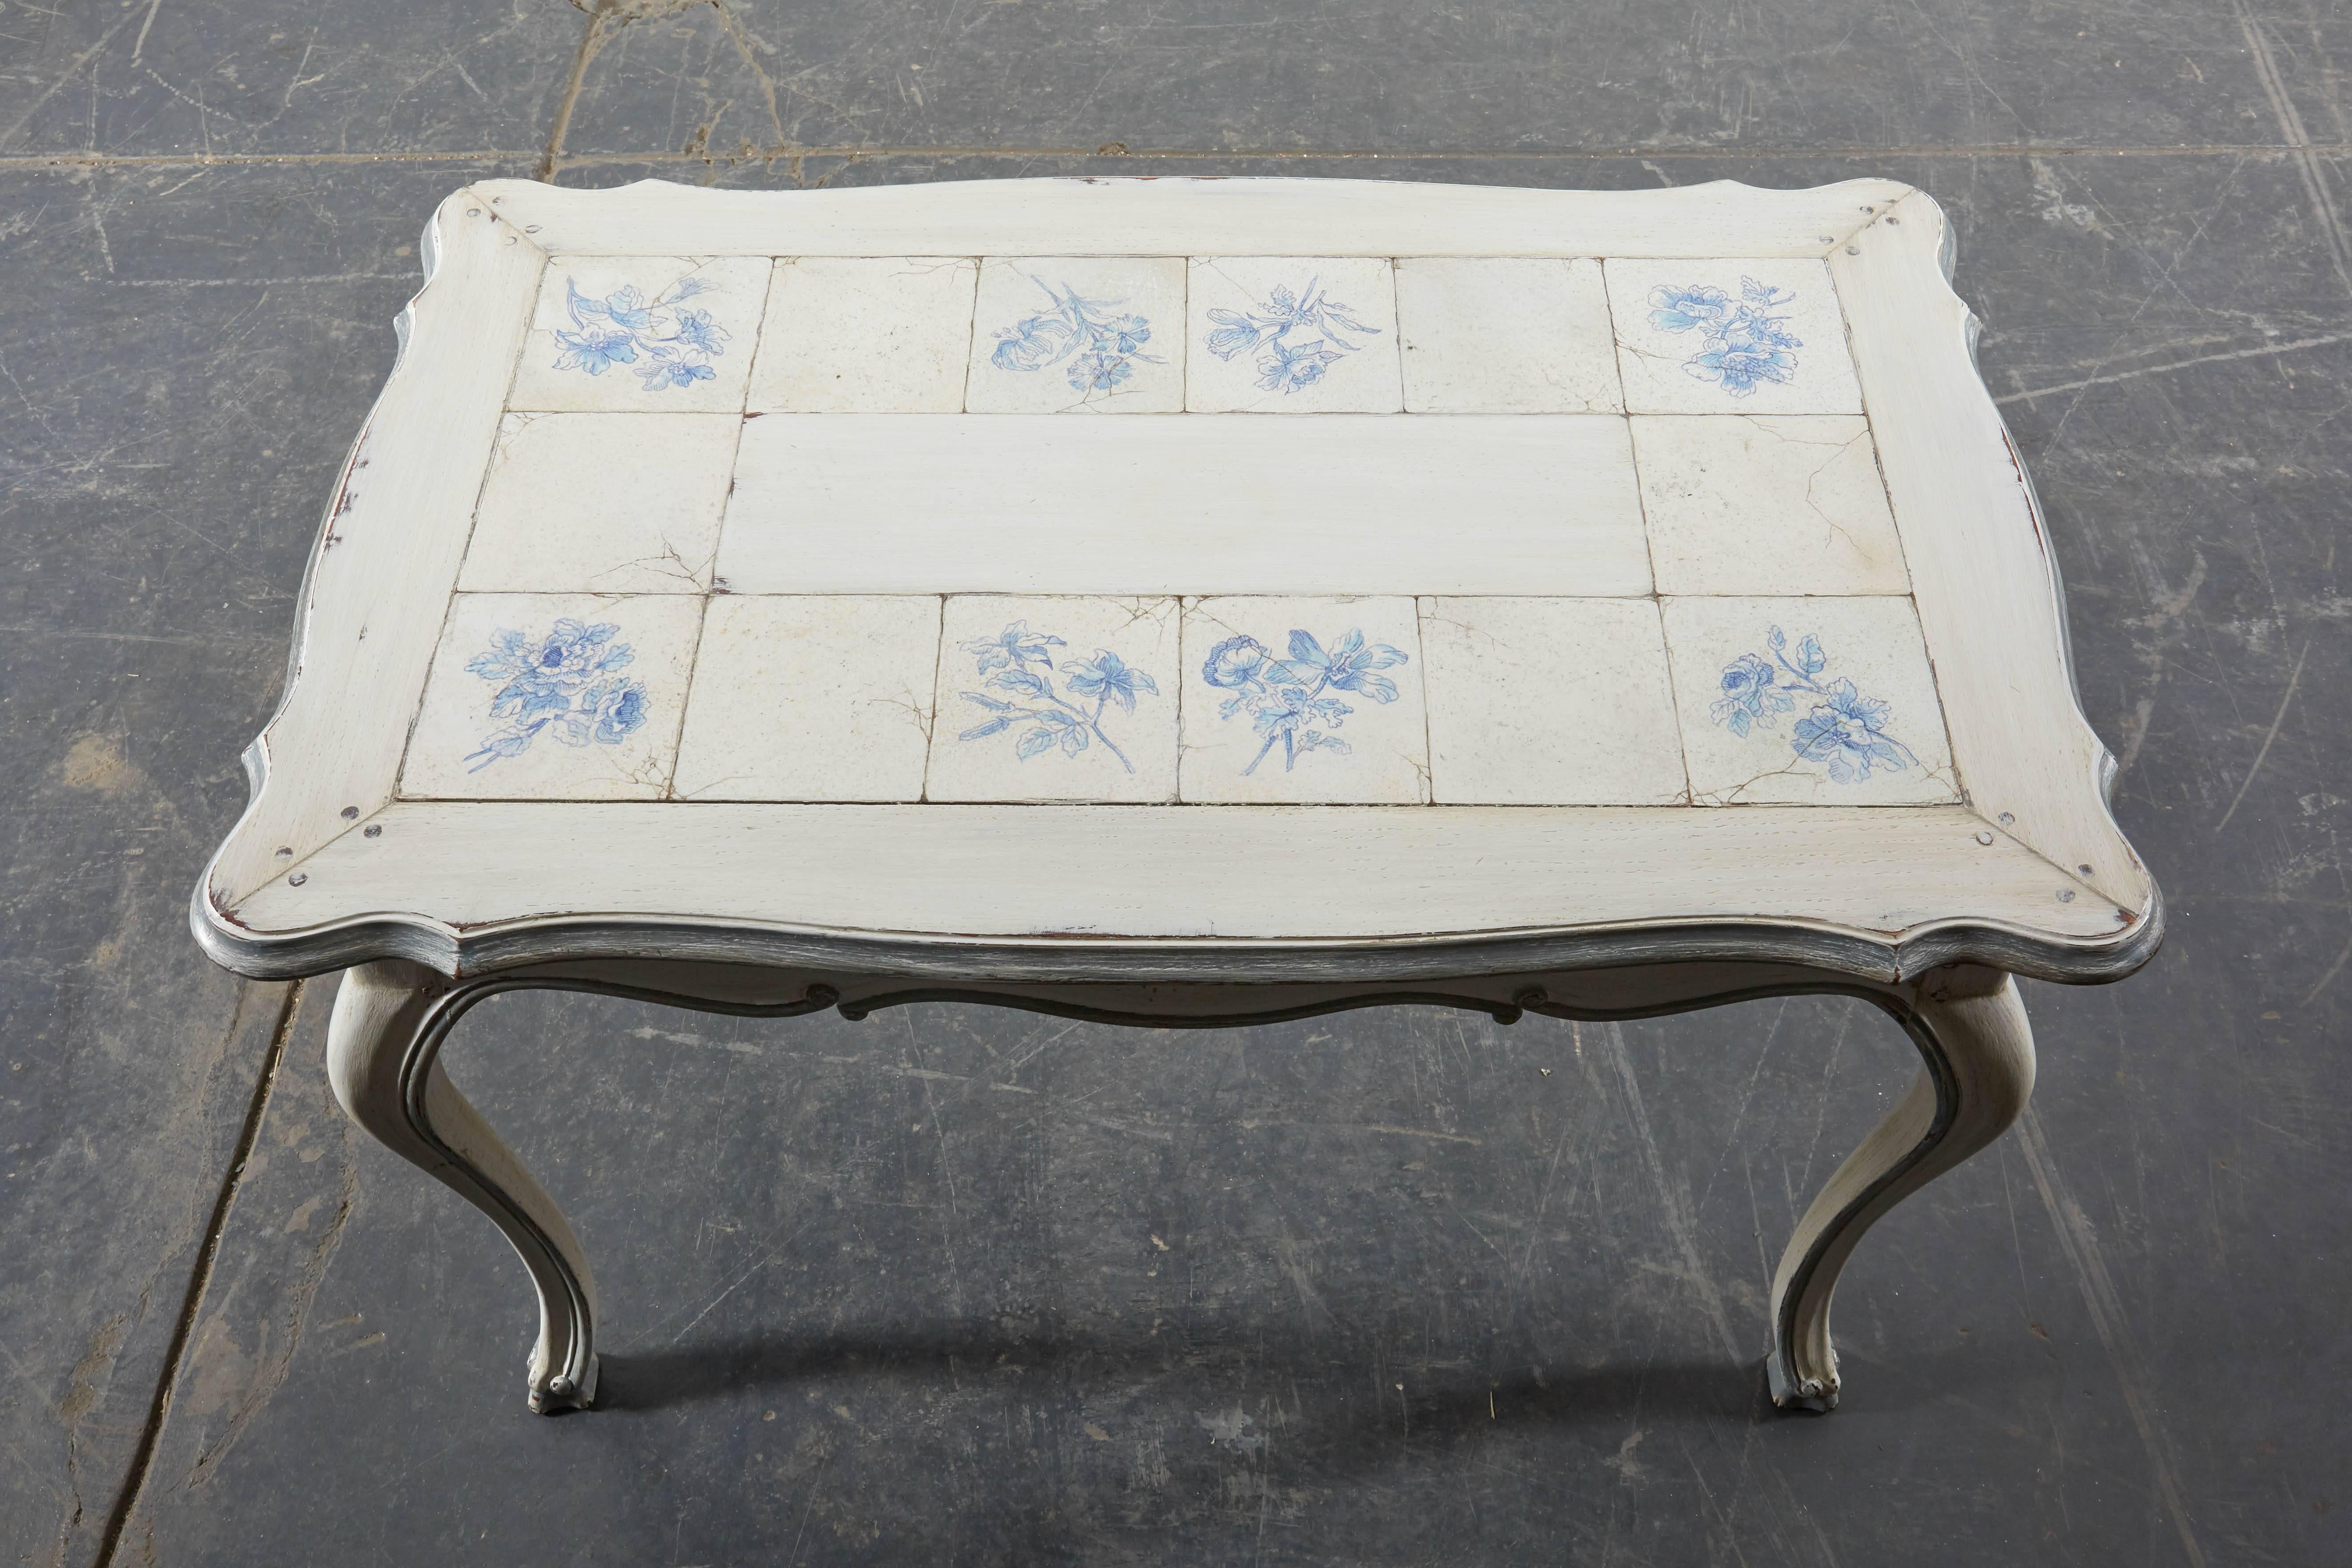 The rectangular top with scalloped edge finely painted to look like antique delft tiles complete with faux craquelure; raised on cabriole legs; painted an antique white with pale blue detailing.